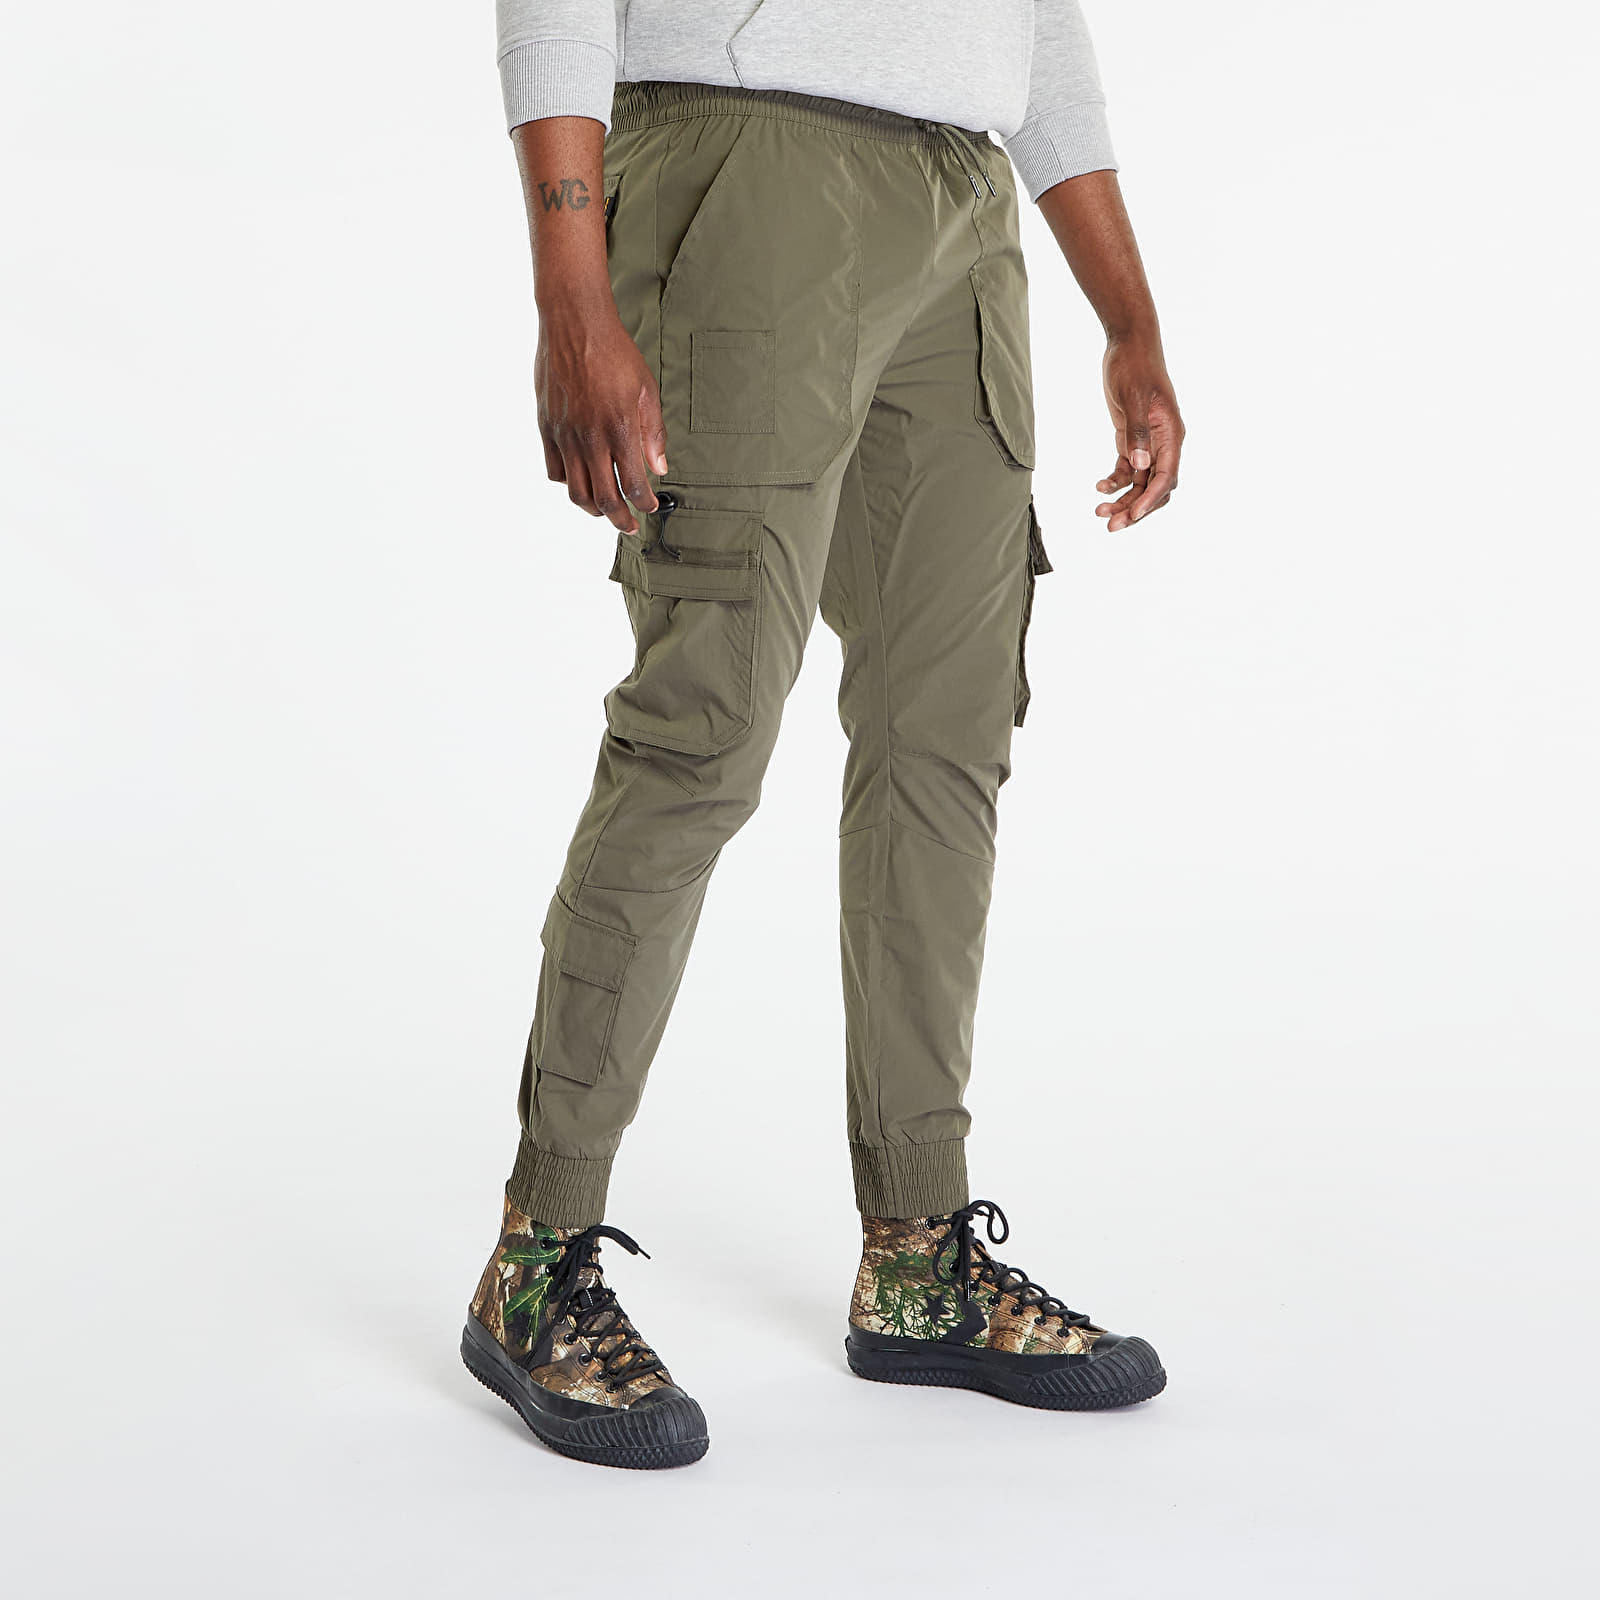 Pants Olive and Industries Dark jeans Pant | Jogger Tactical Alpha Queens